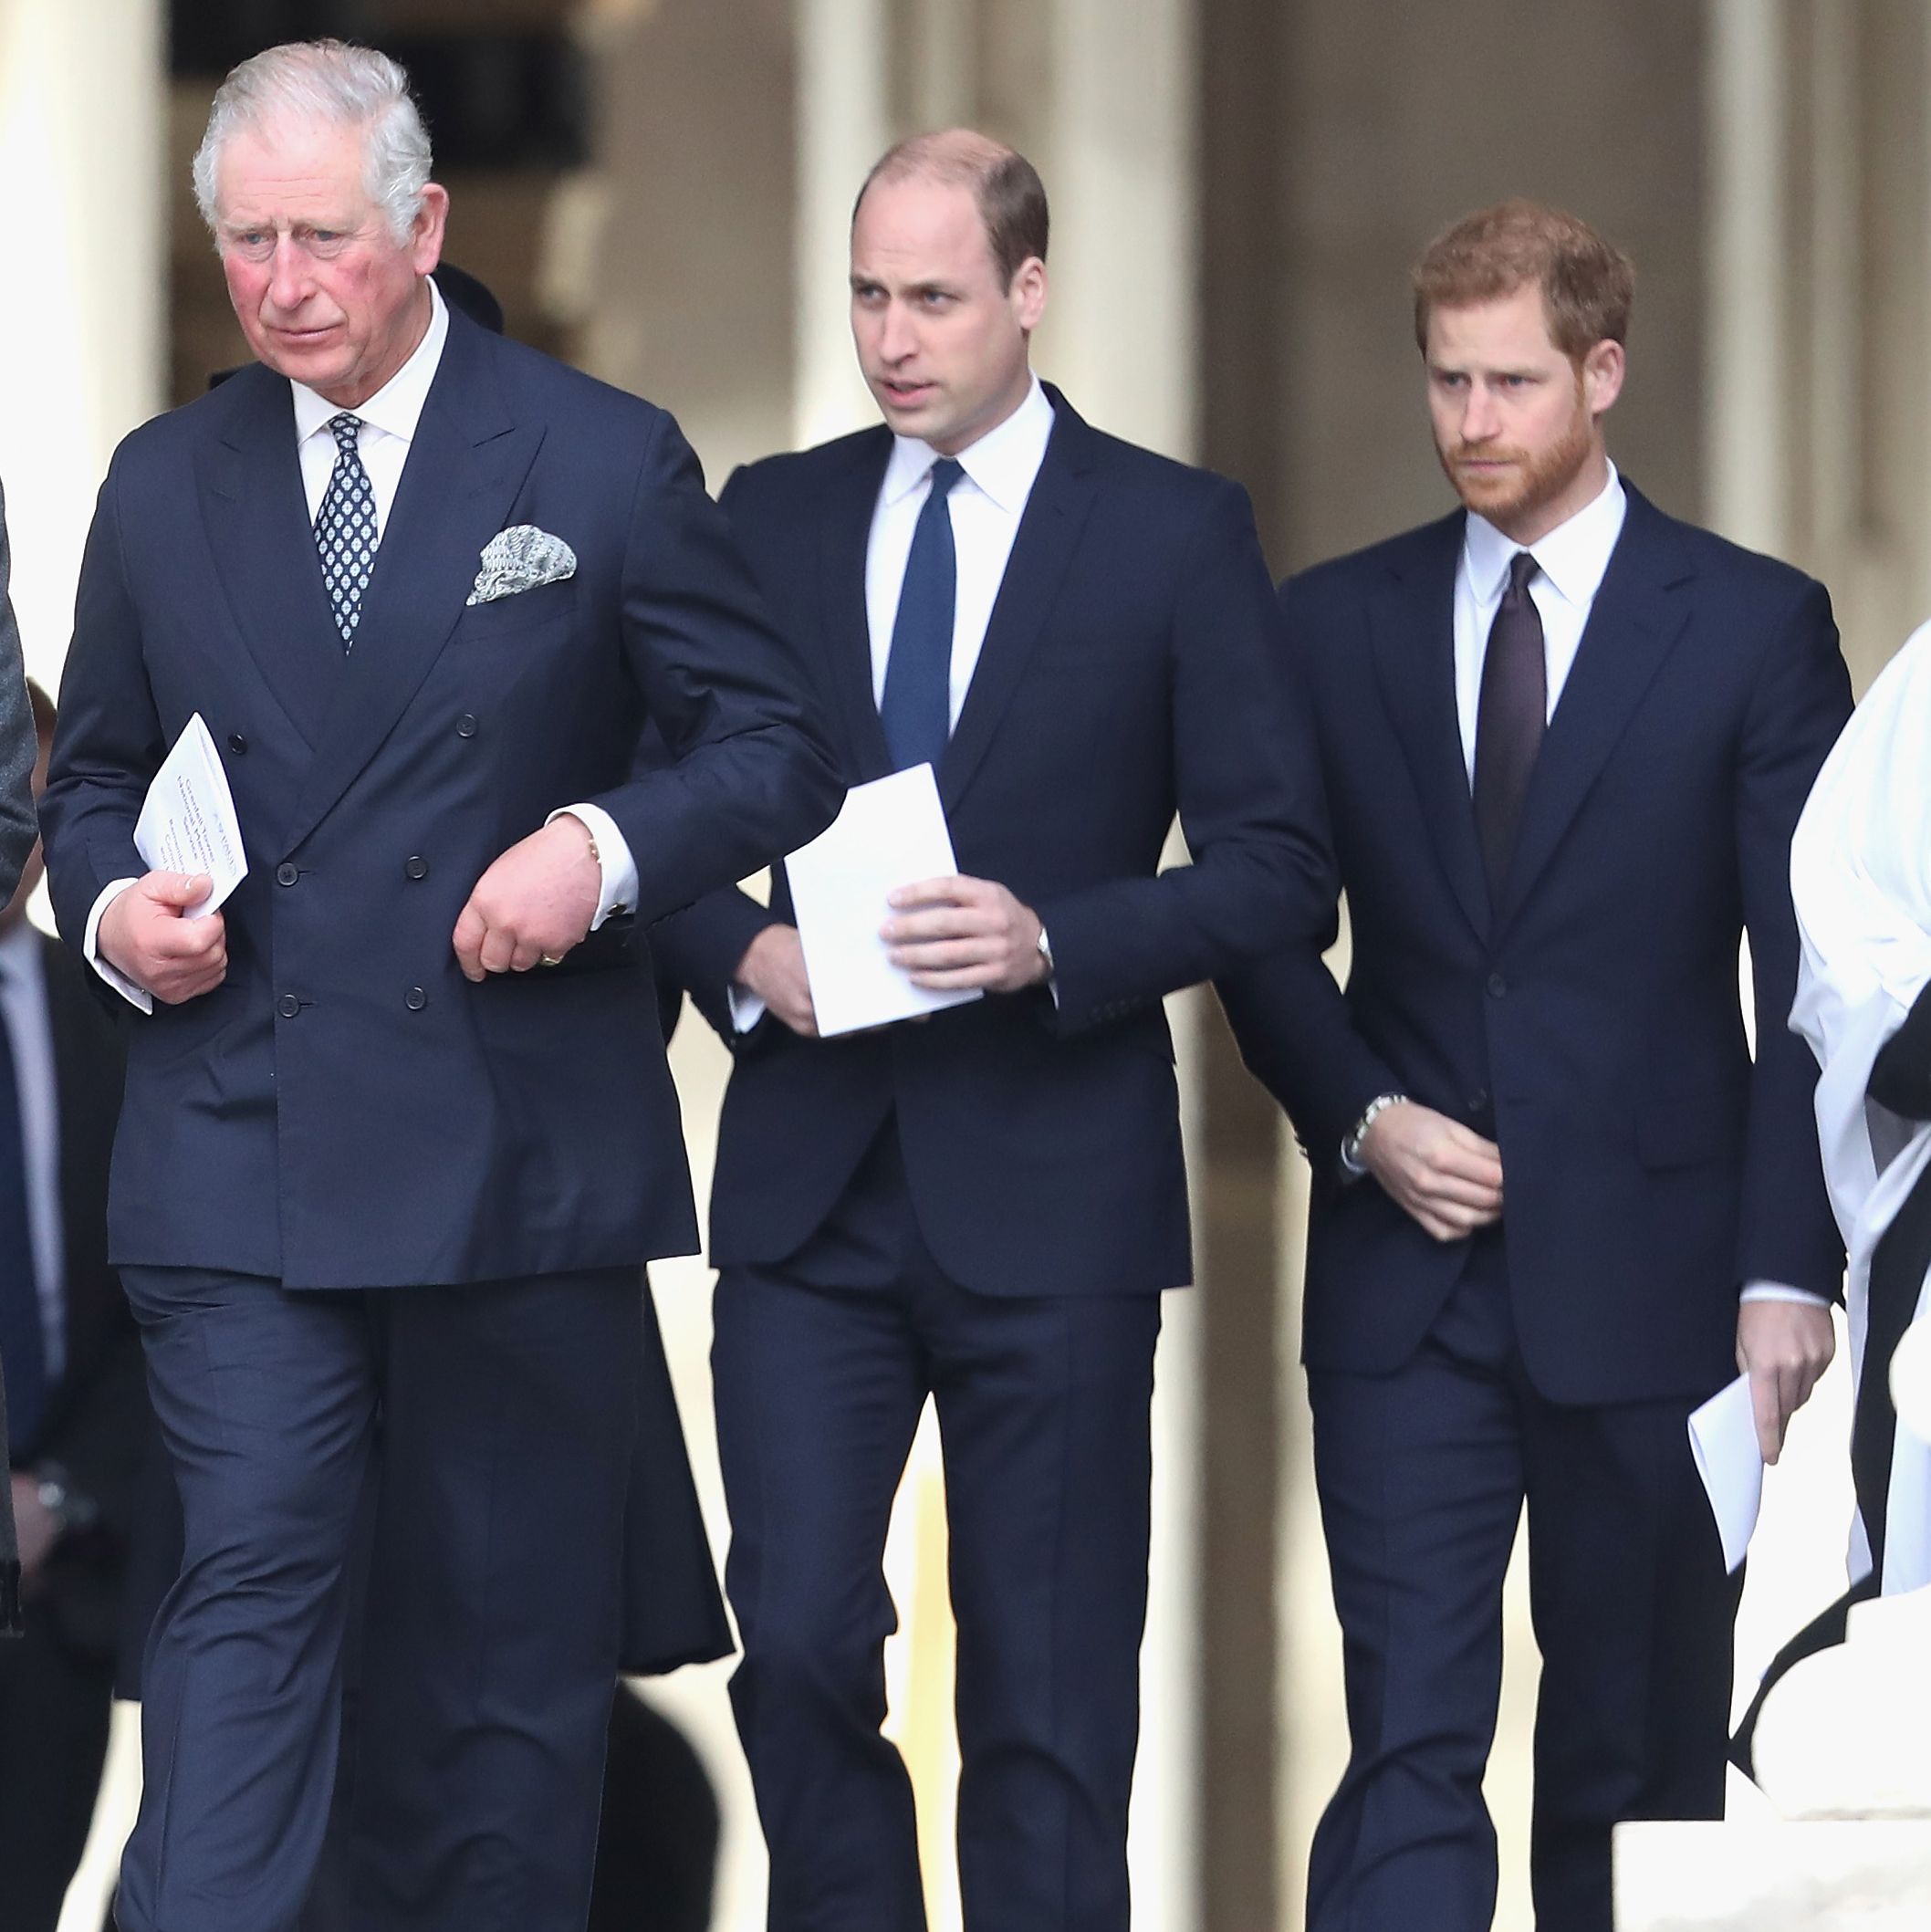 William and Charles' relationships with Harry are in very different places, sources told a royal reporter.